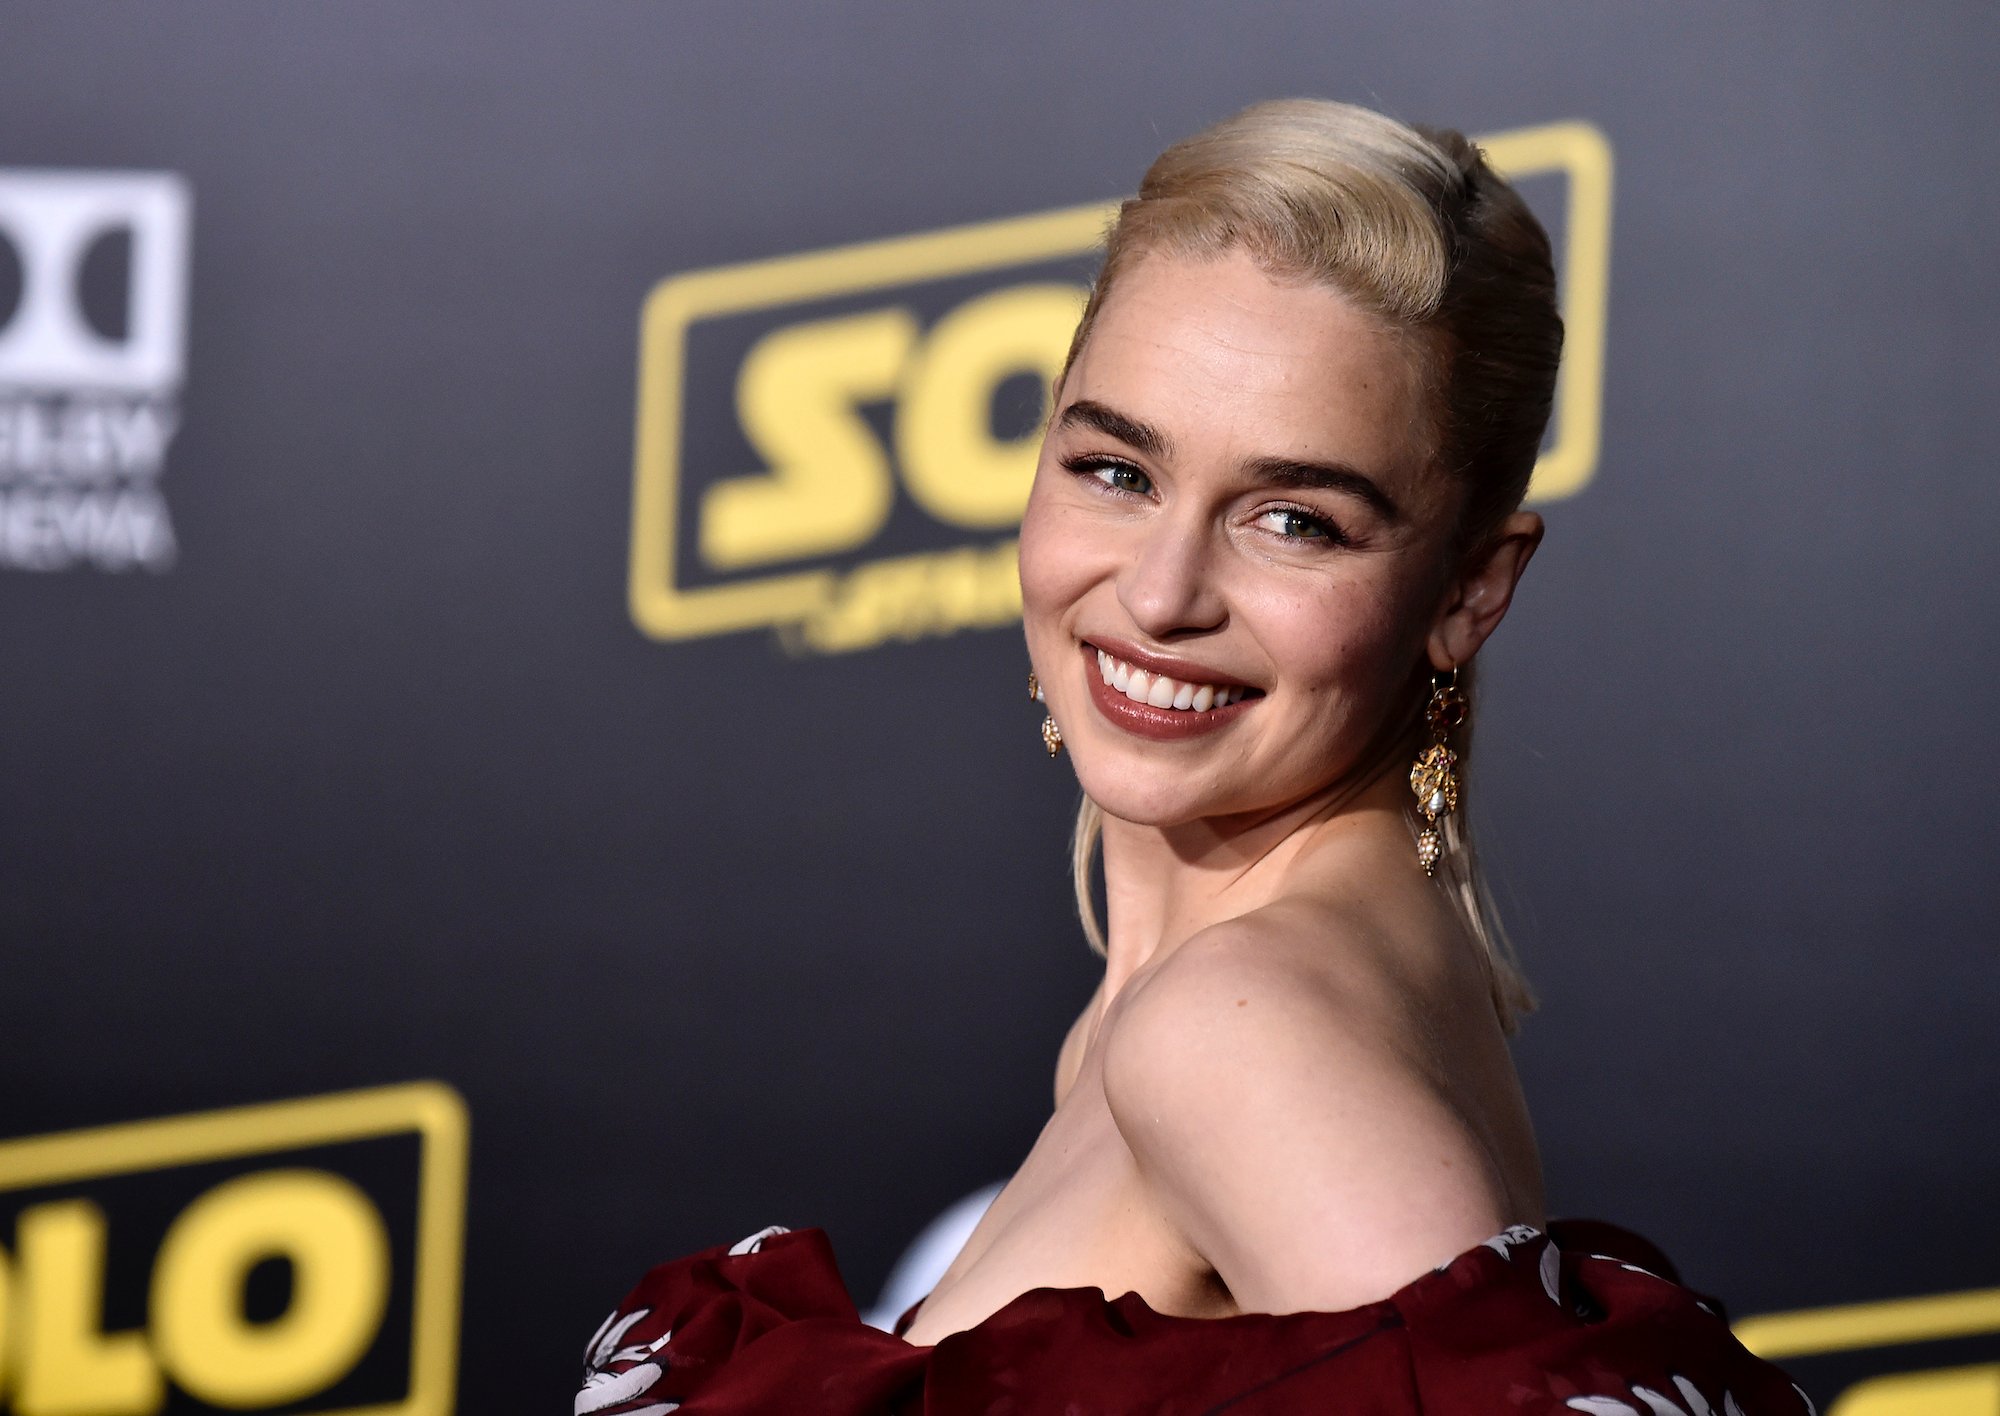 Emilia Clarke at the premiere of 'Solo: A Star Wars Story' on May 10, 2018.